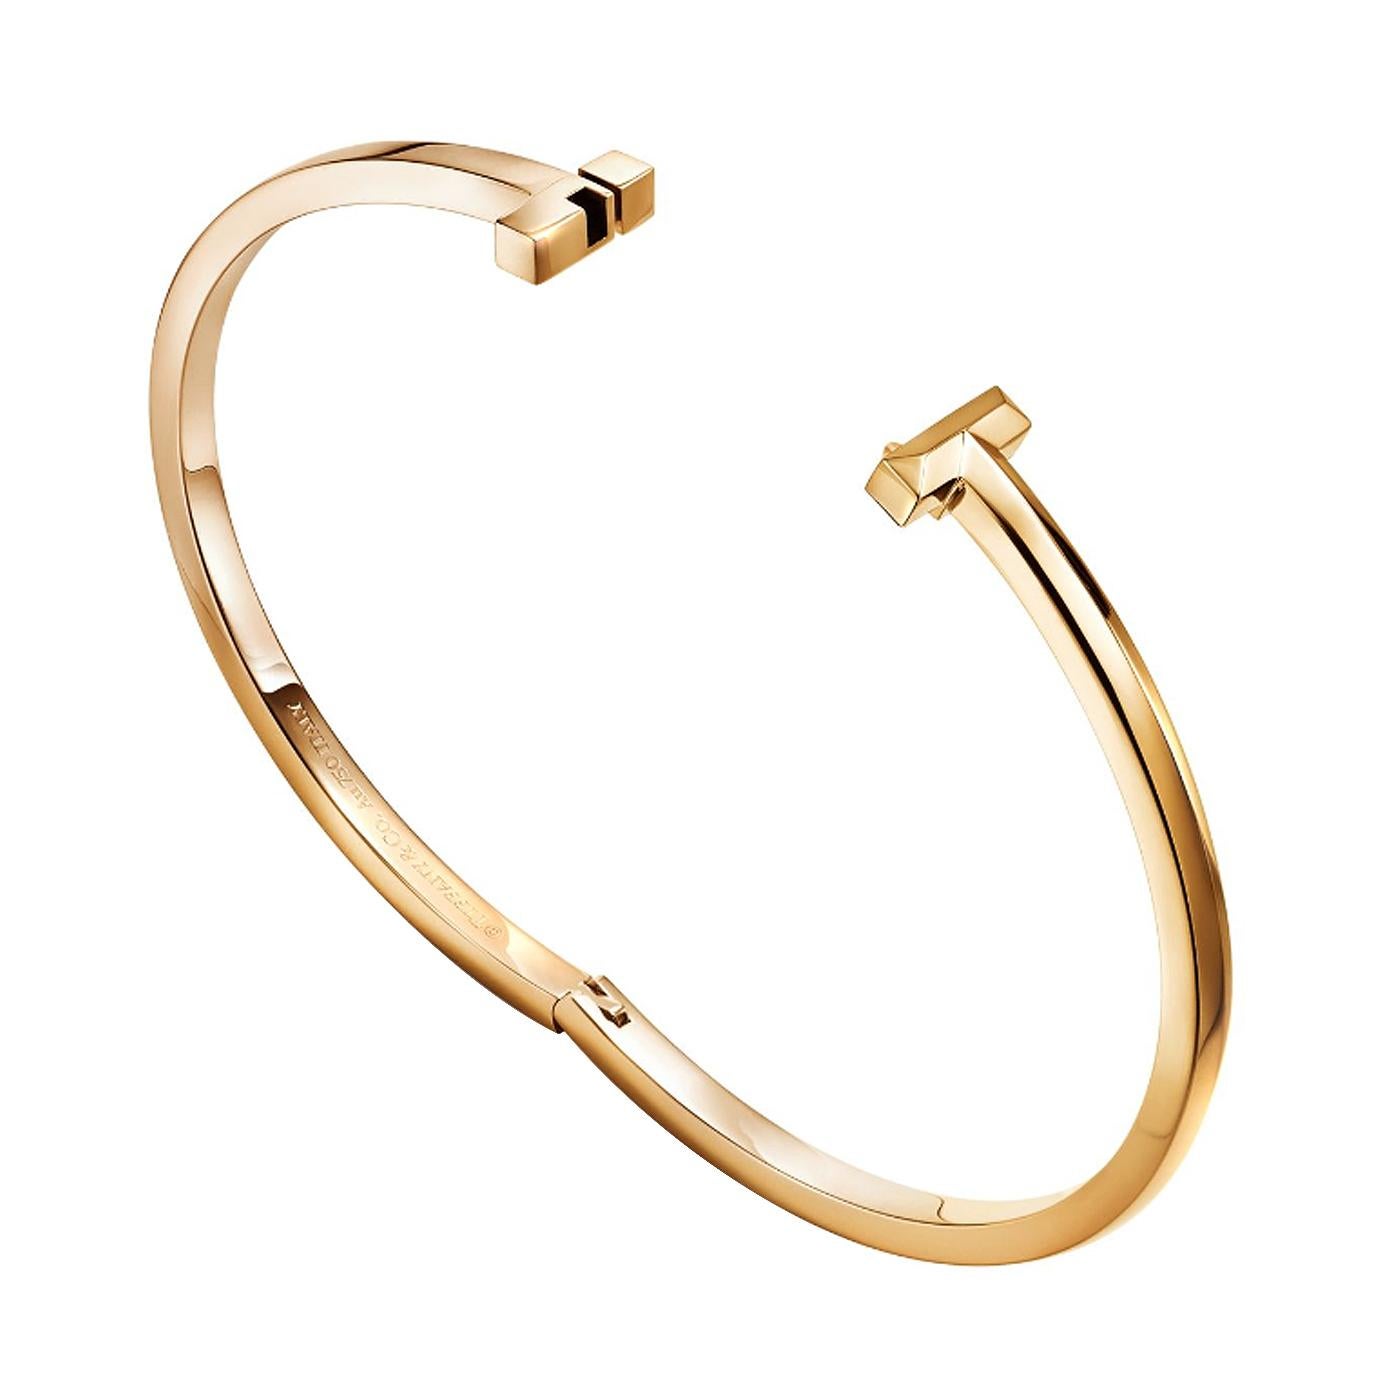 Modernist Tiffany & Co T T1 Narrow Hinged Bangle in 18k Gold Medium Size For Sale